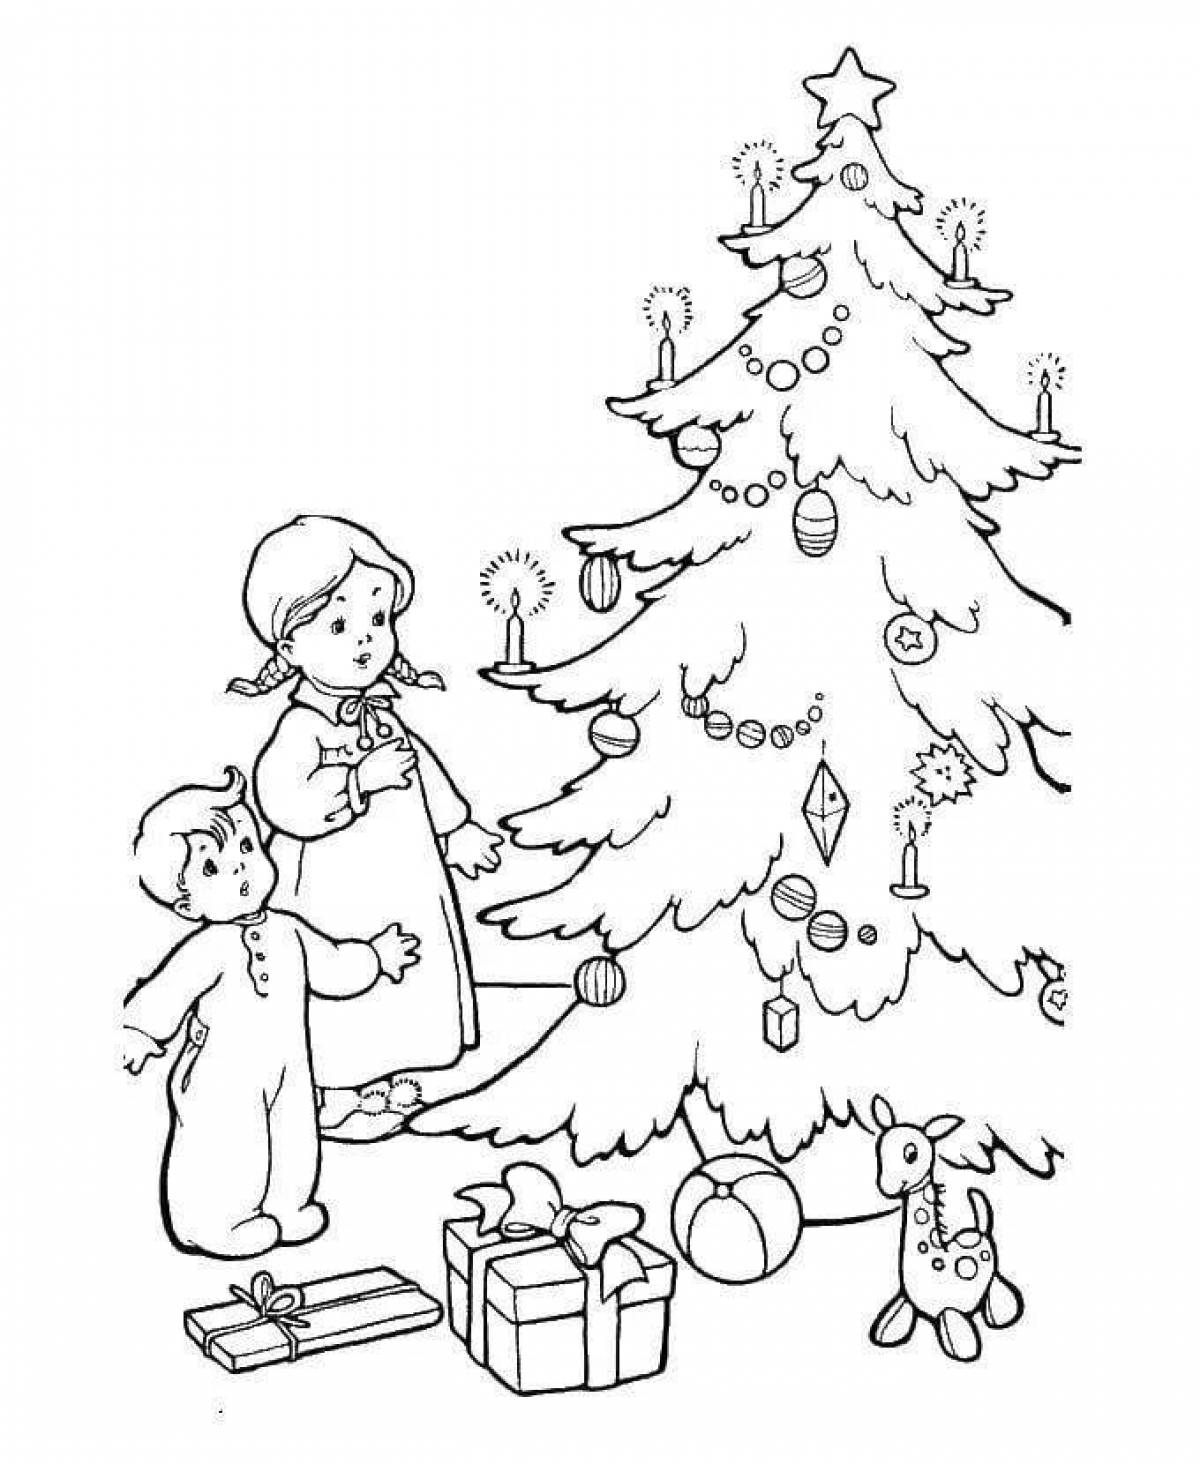 Color-filled safe Christmas coloring book